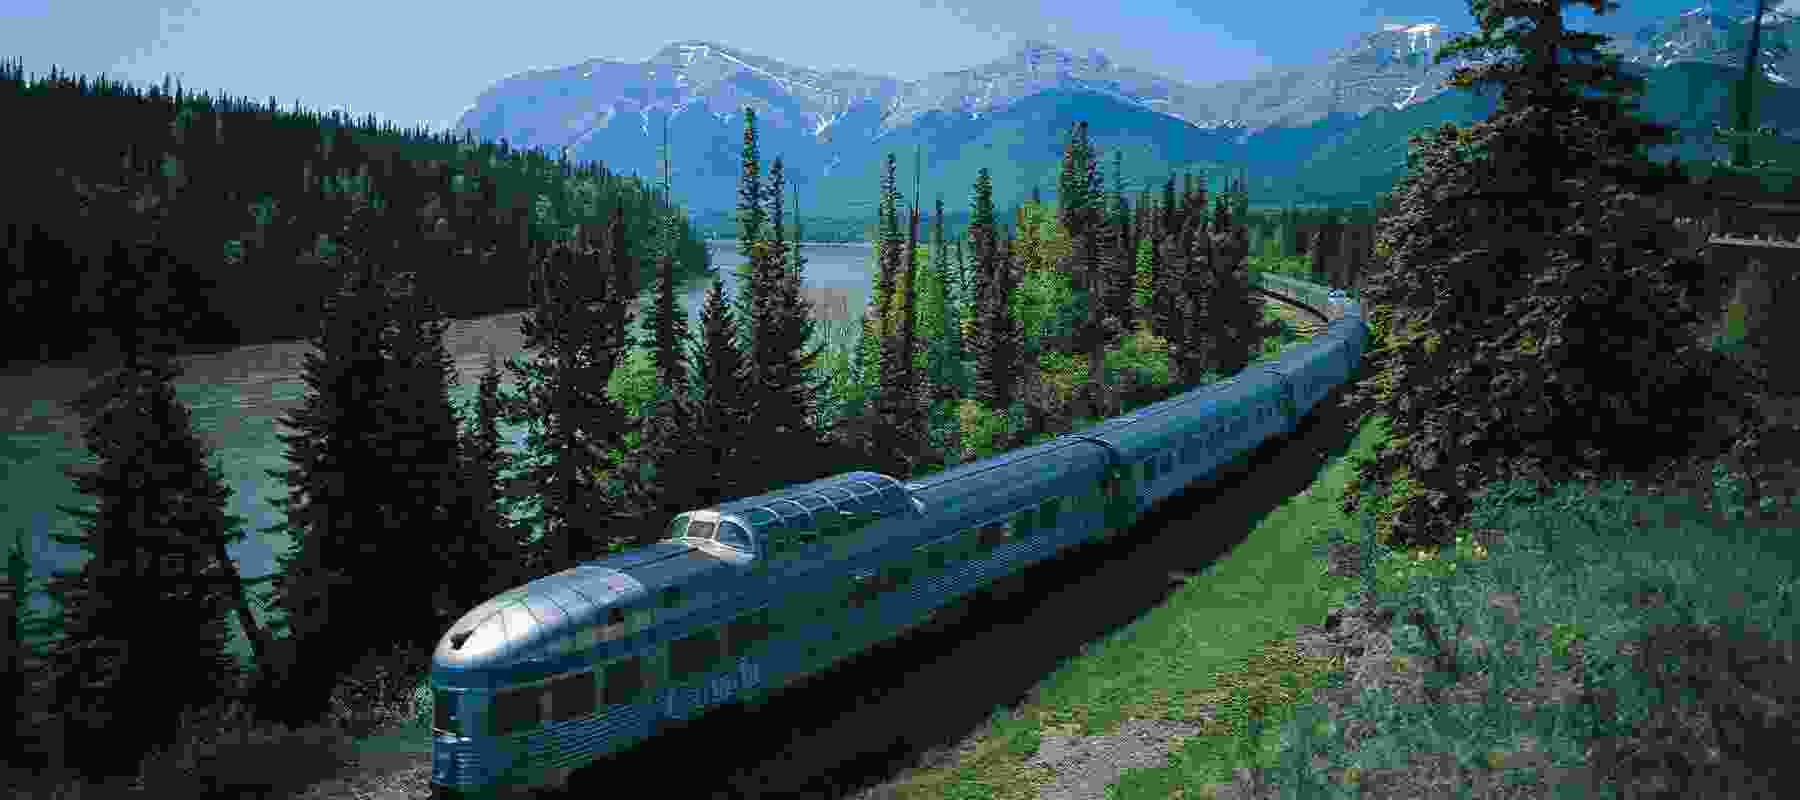 Canada Train Vacations | VIA Rail in the Canadian Rockies